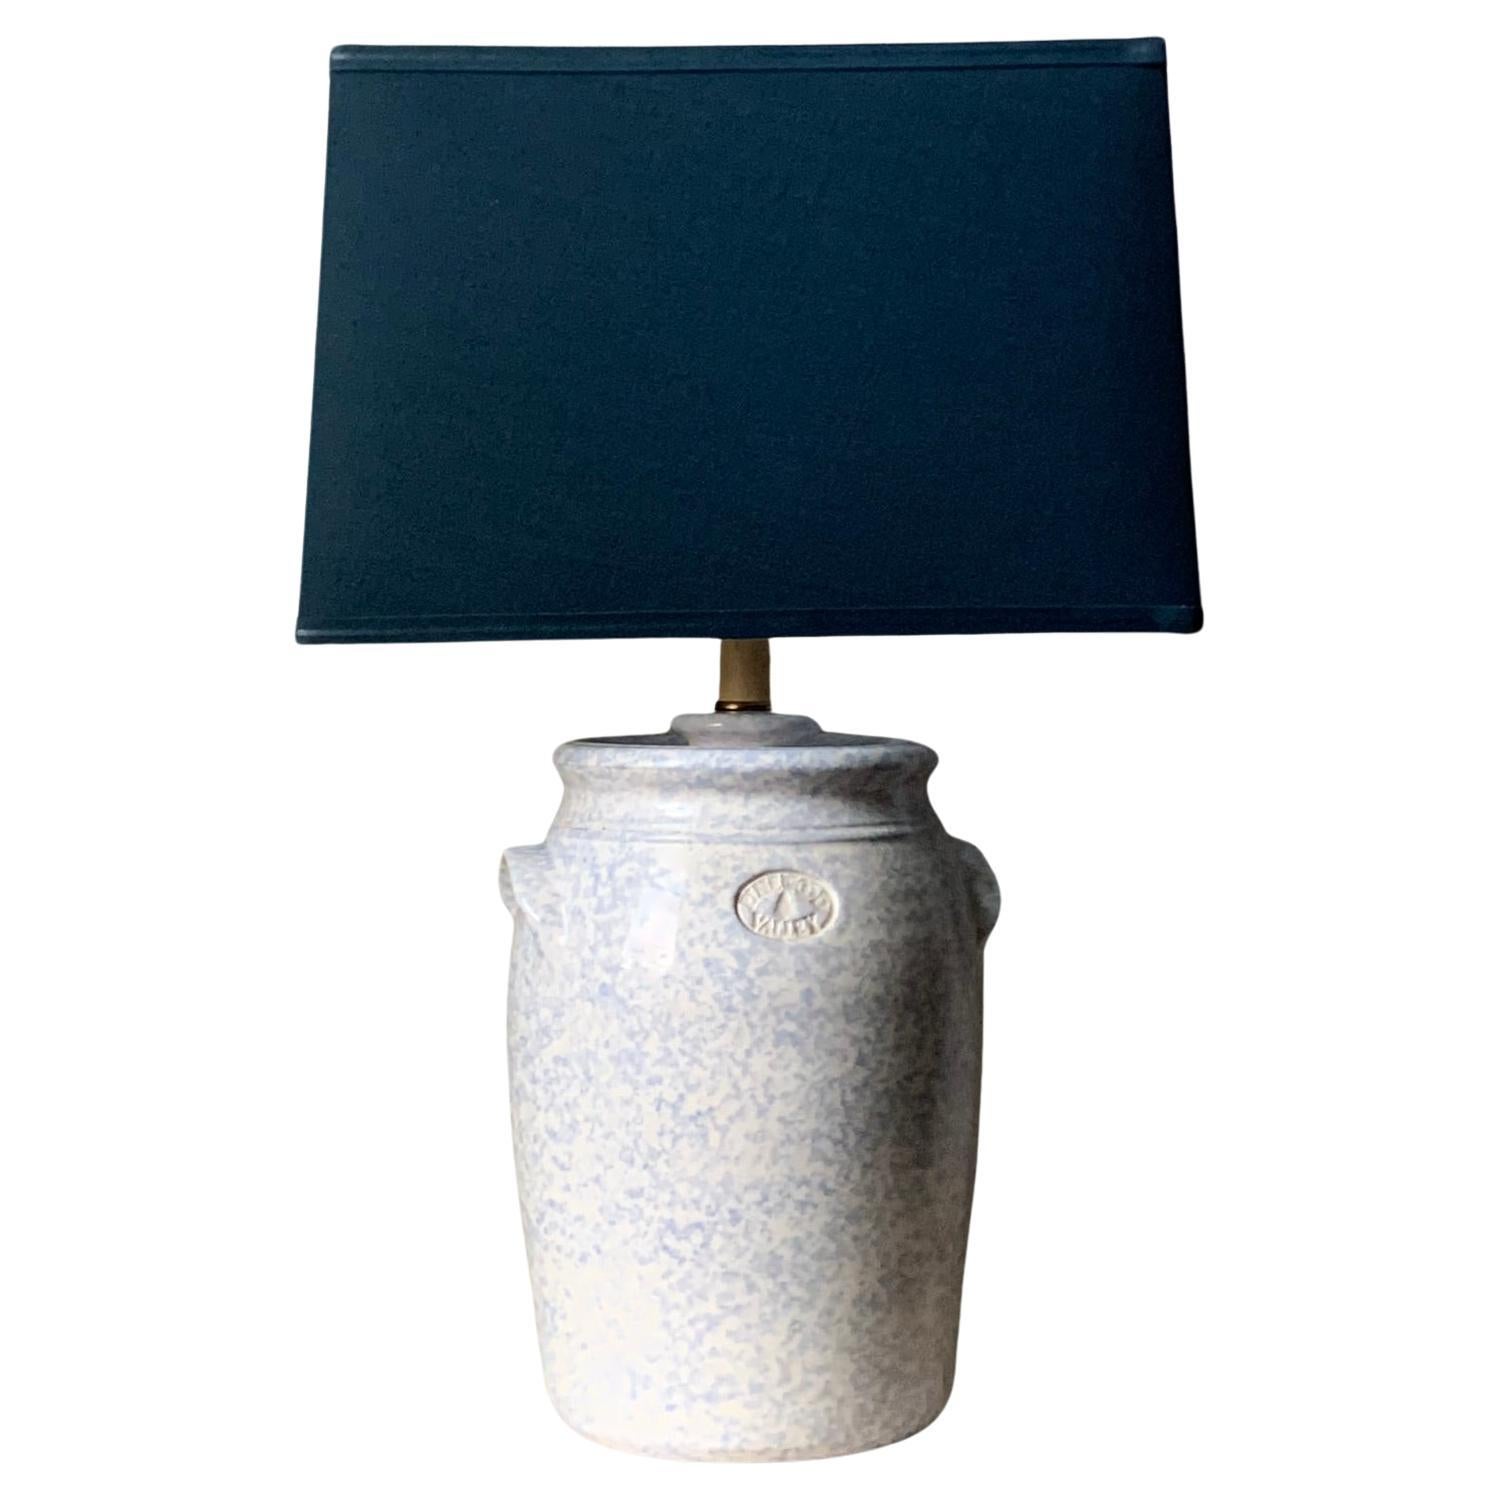 Blue and White, Speckled Body, Urn Pottery as Lamp, 20th Century For Sale